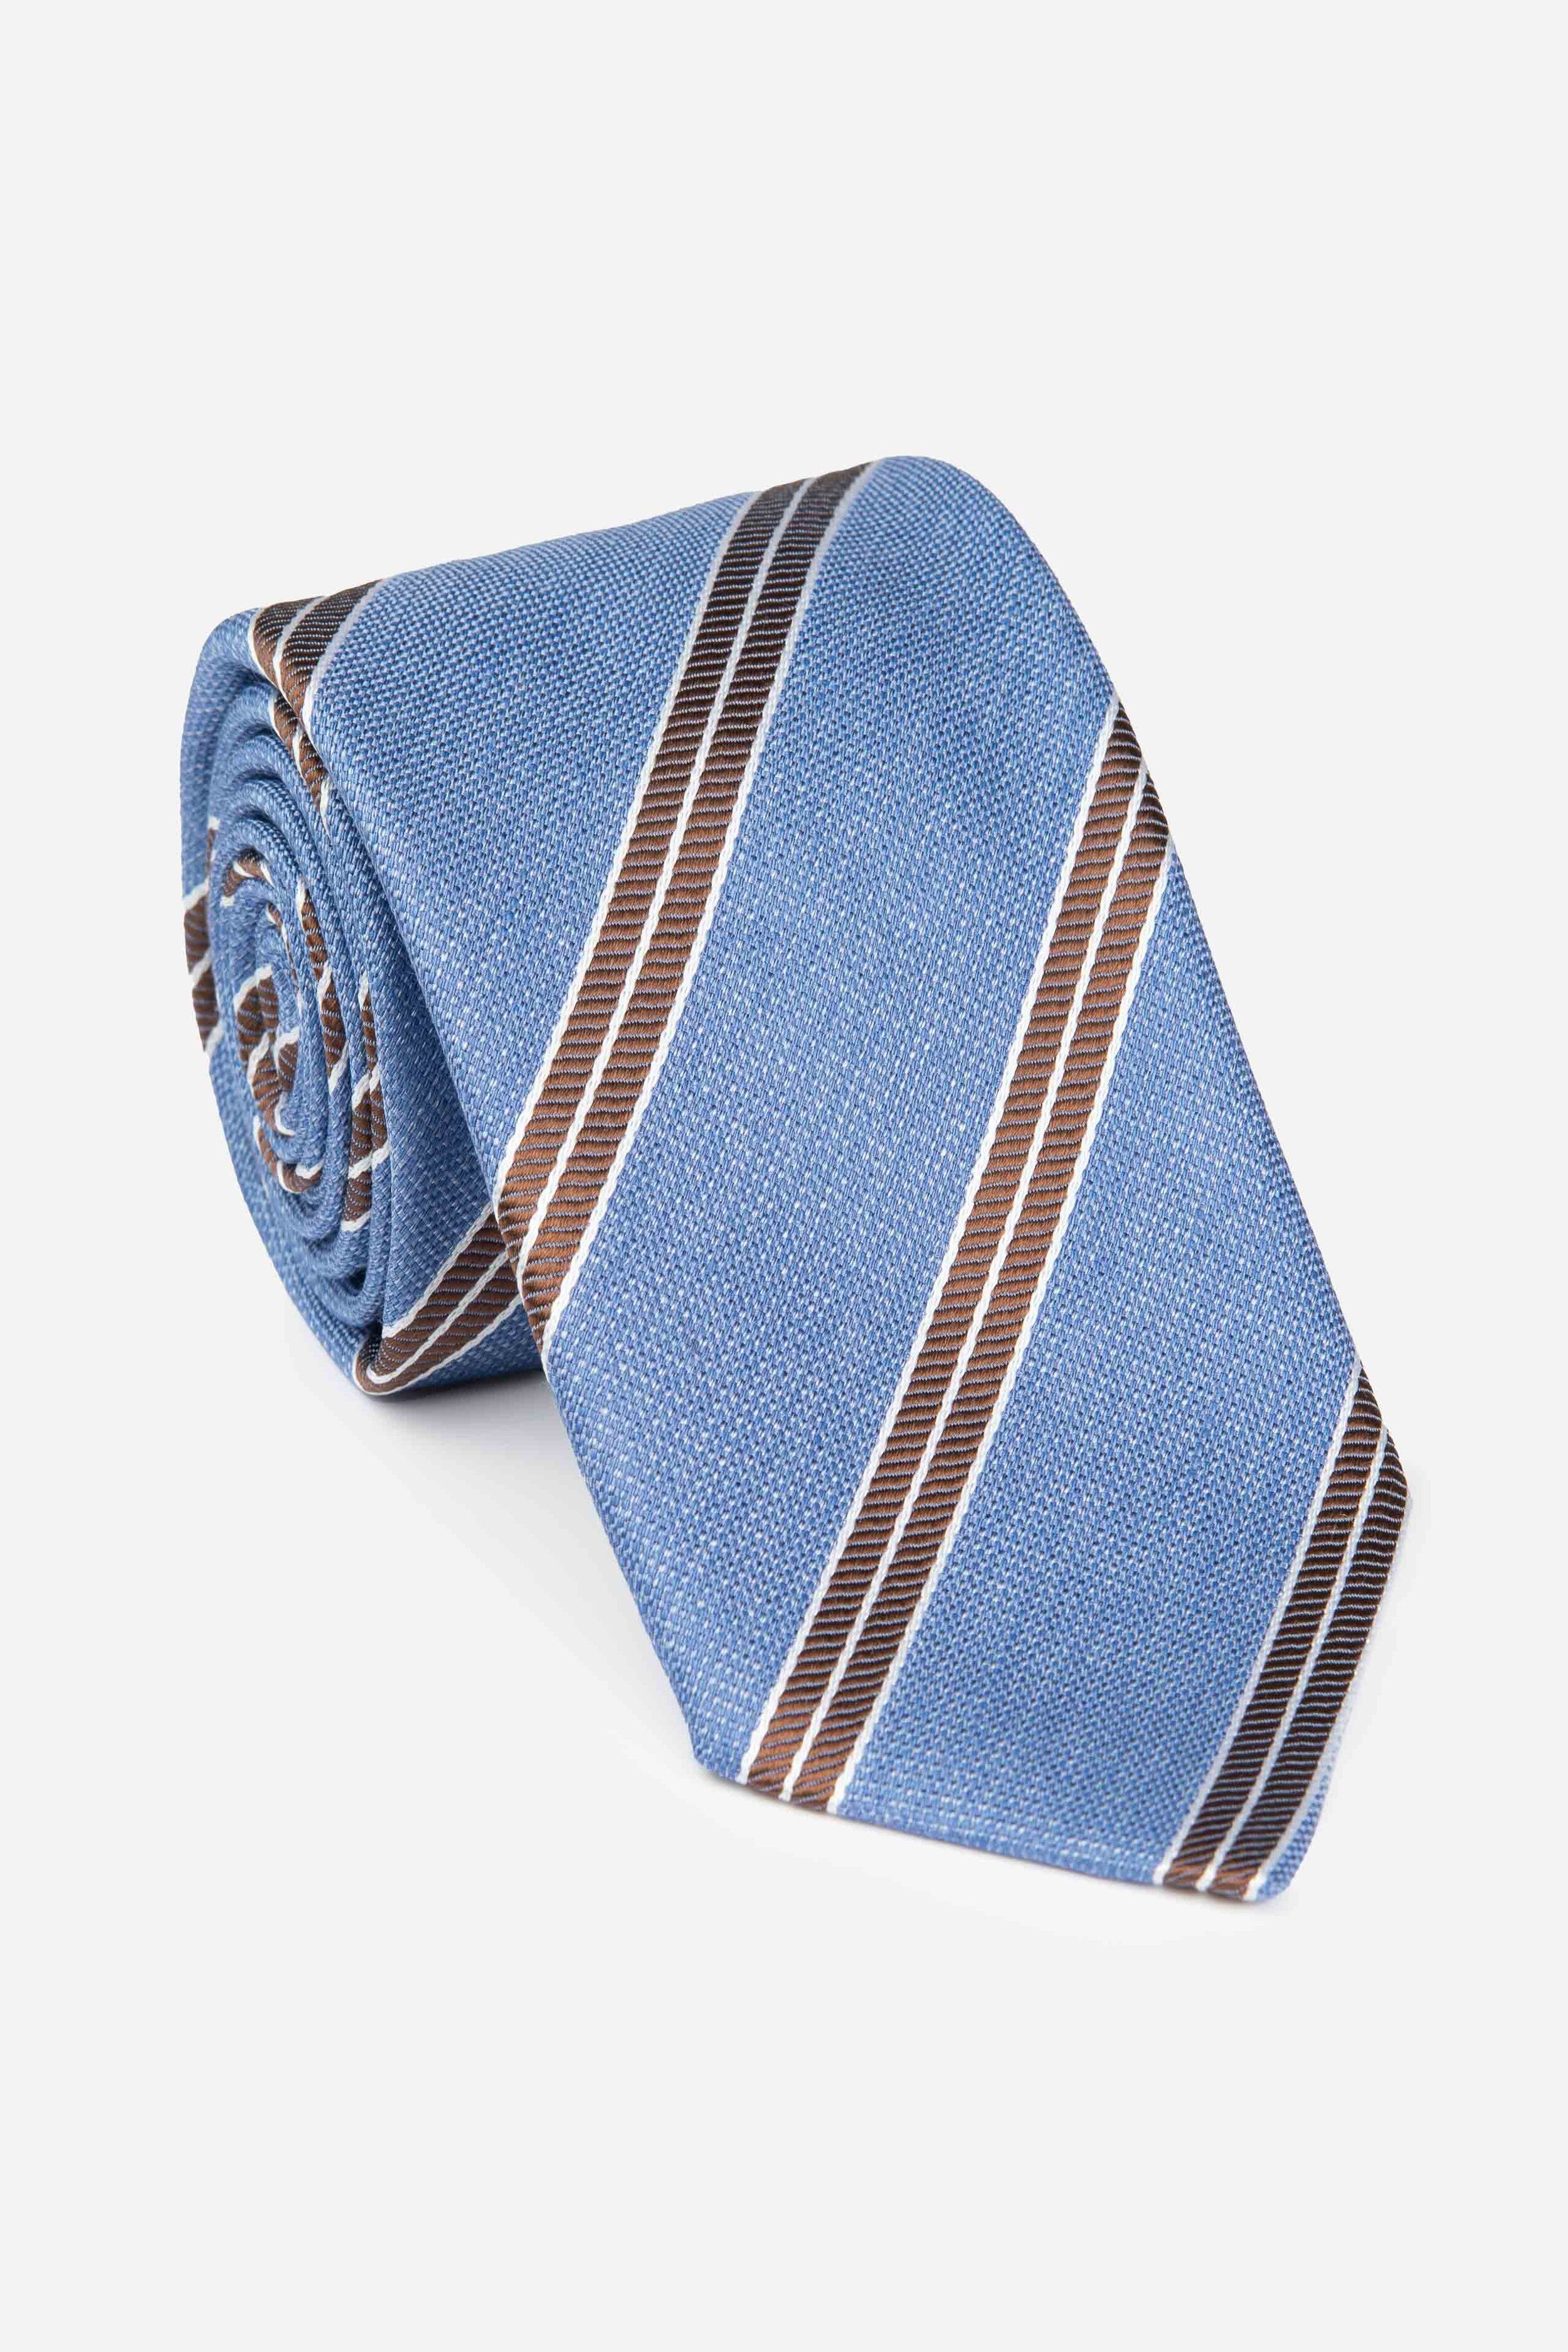 Striped patterned tie - Light blue-Brown